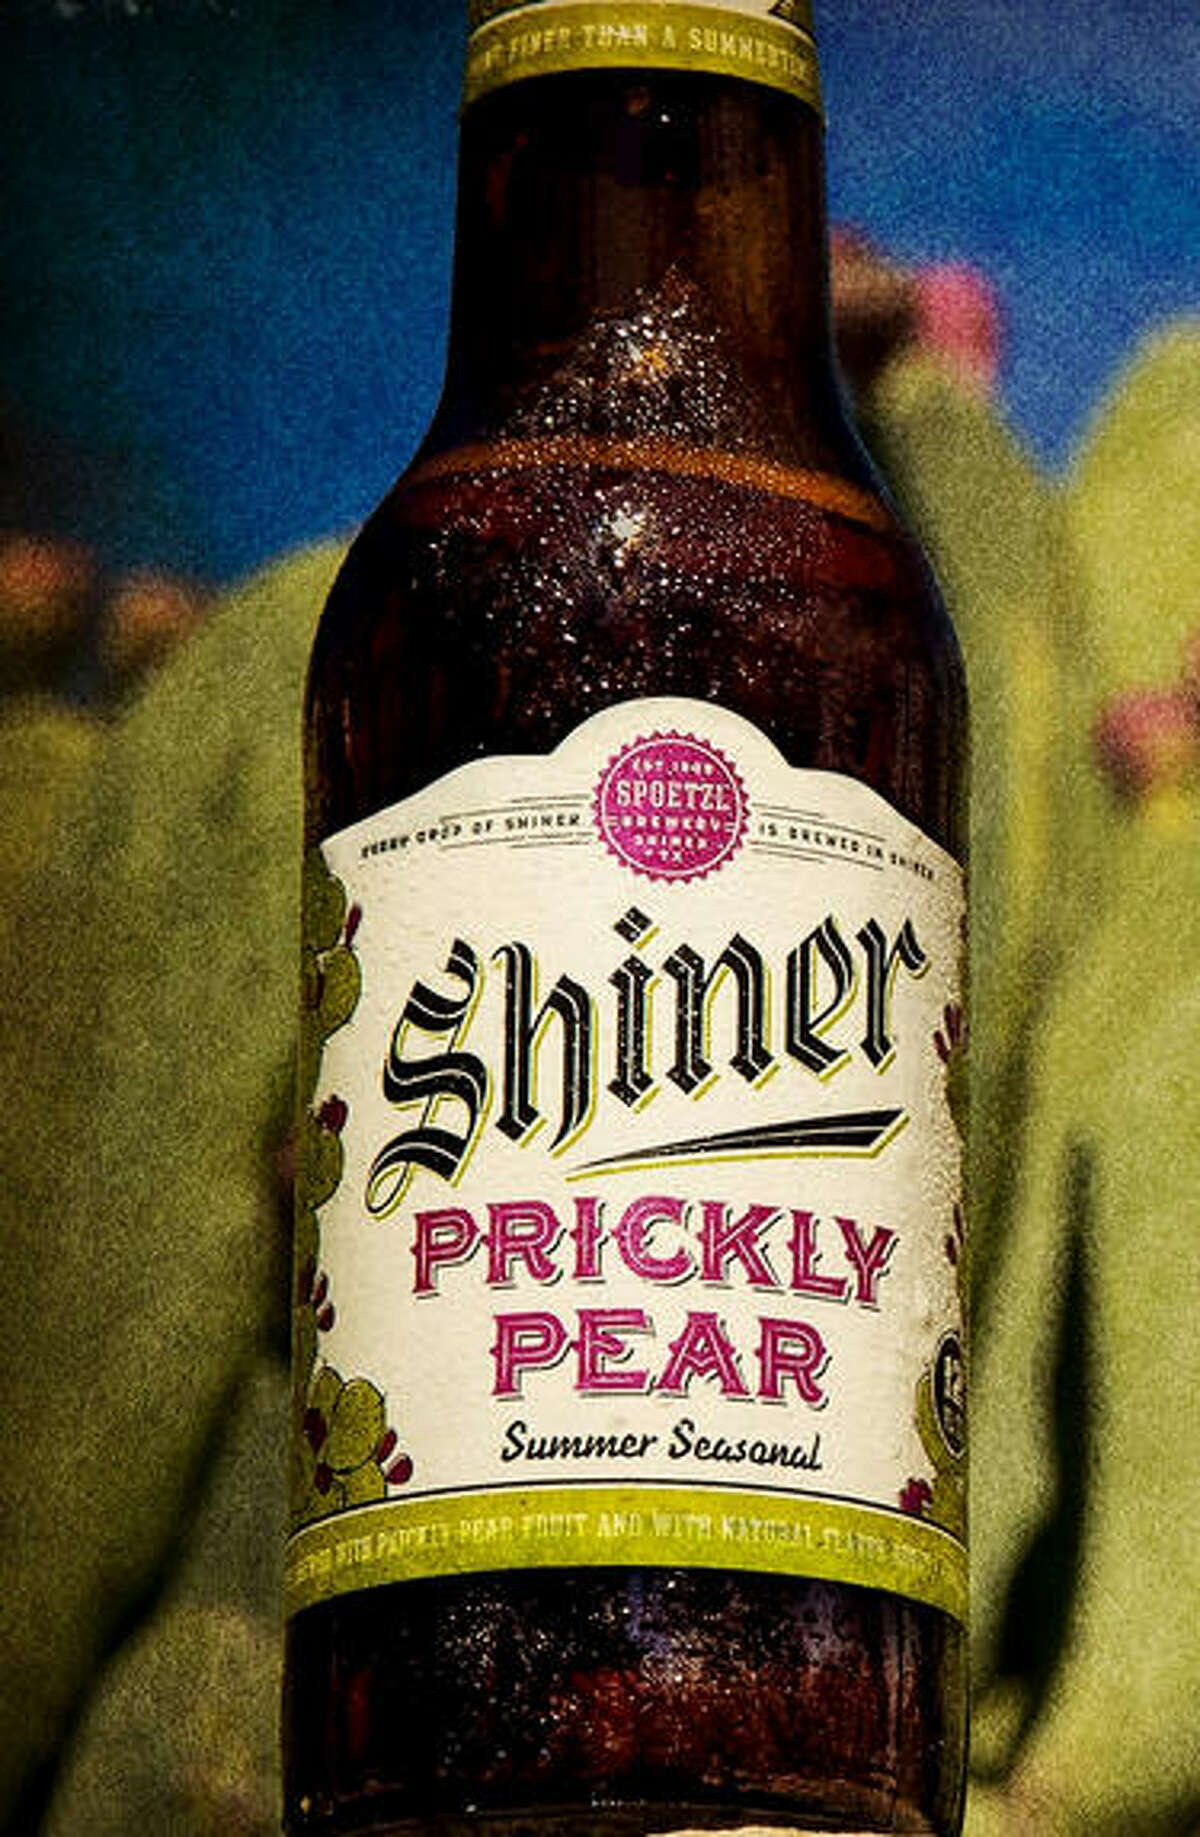 Shiner isn't making its Prickly Pear summer seasonal in 2017, taking a year off from the limited-run Texas hit which is a part of its Brewer's Pride selections.  Click through to learn more about the history of Shiner Beer...